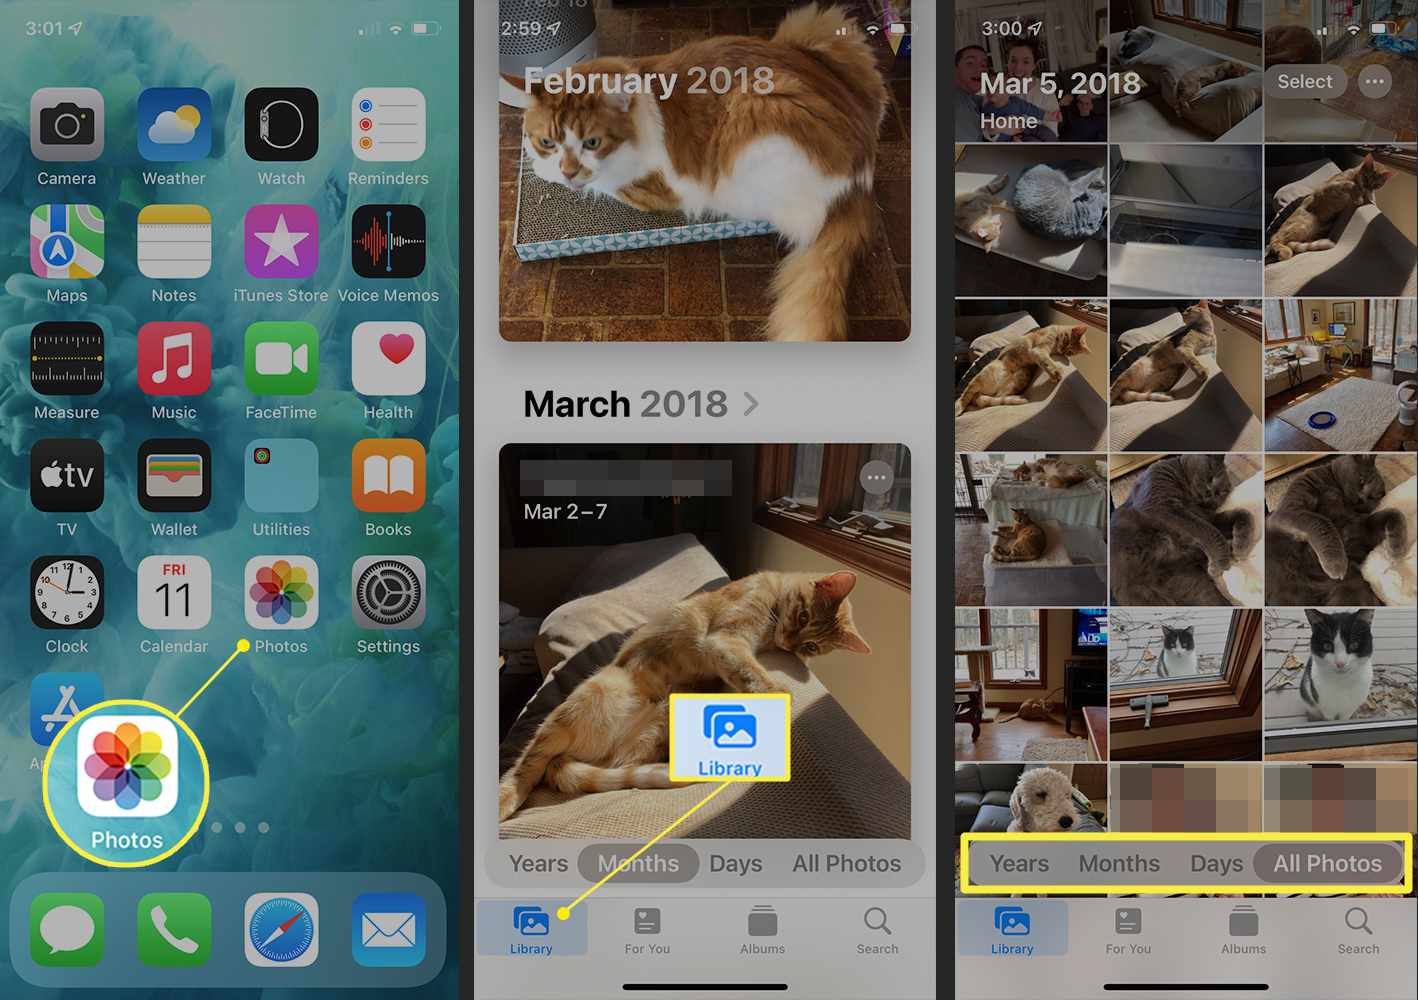 cloud-connection-accessing-icloud-photos-on-iphone-12